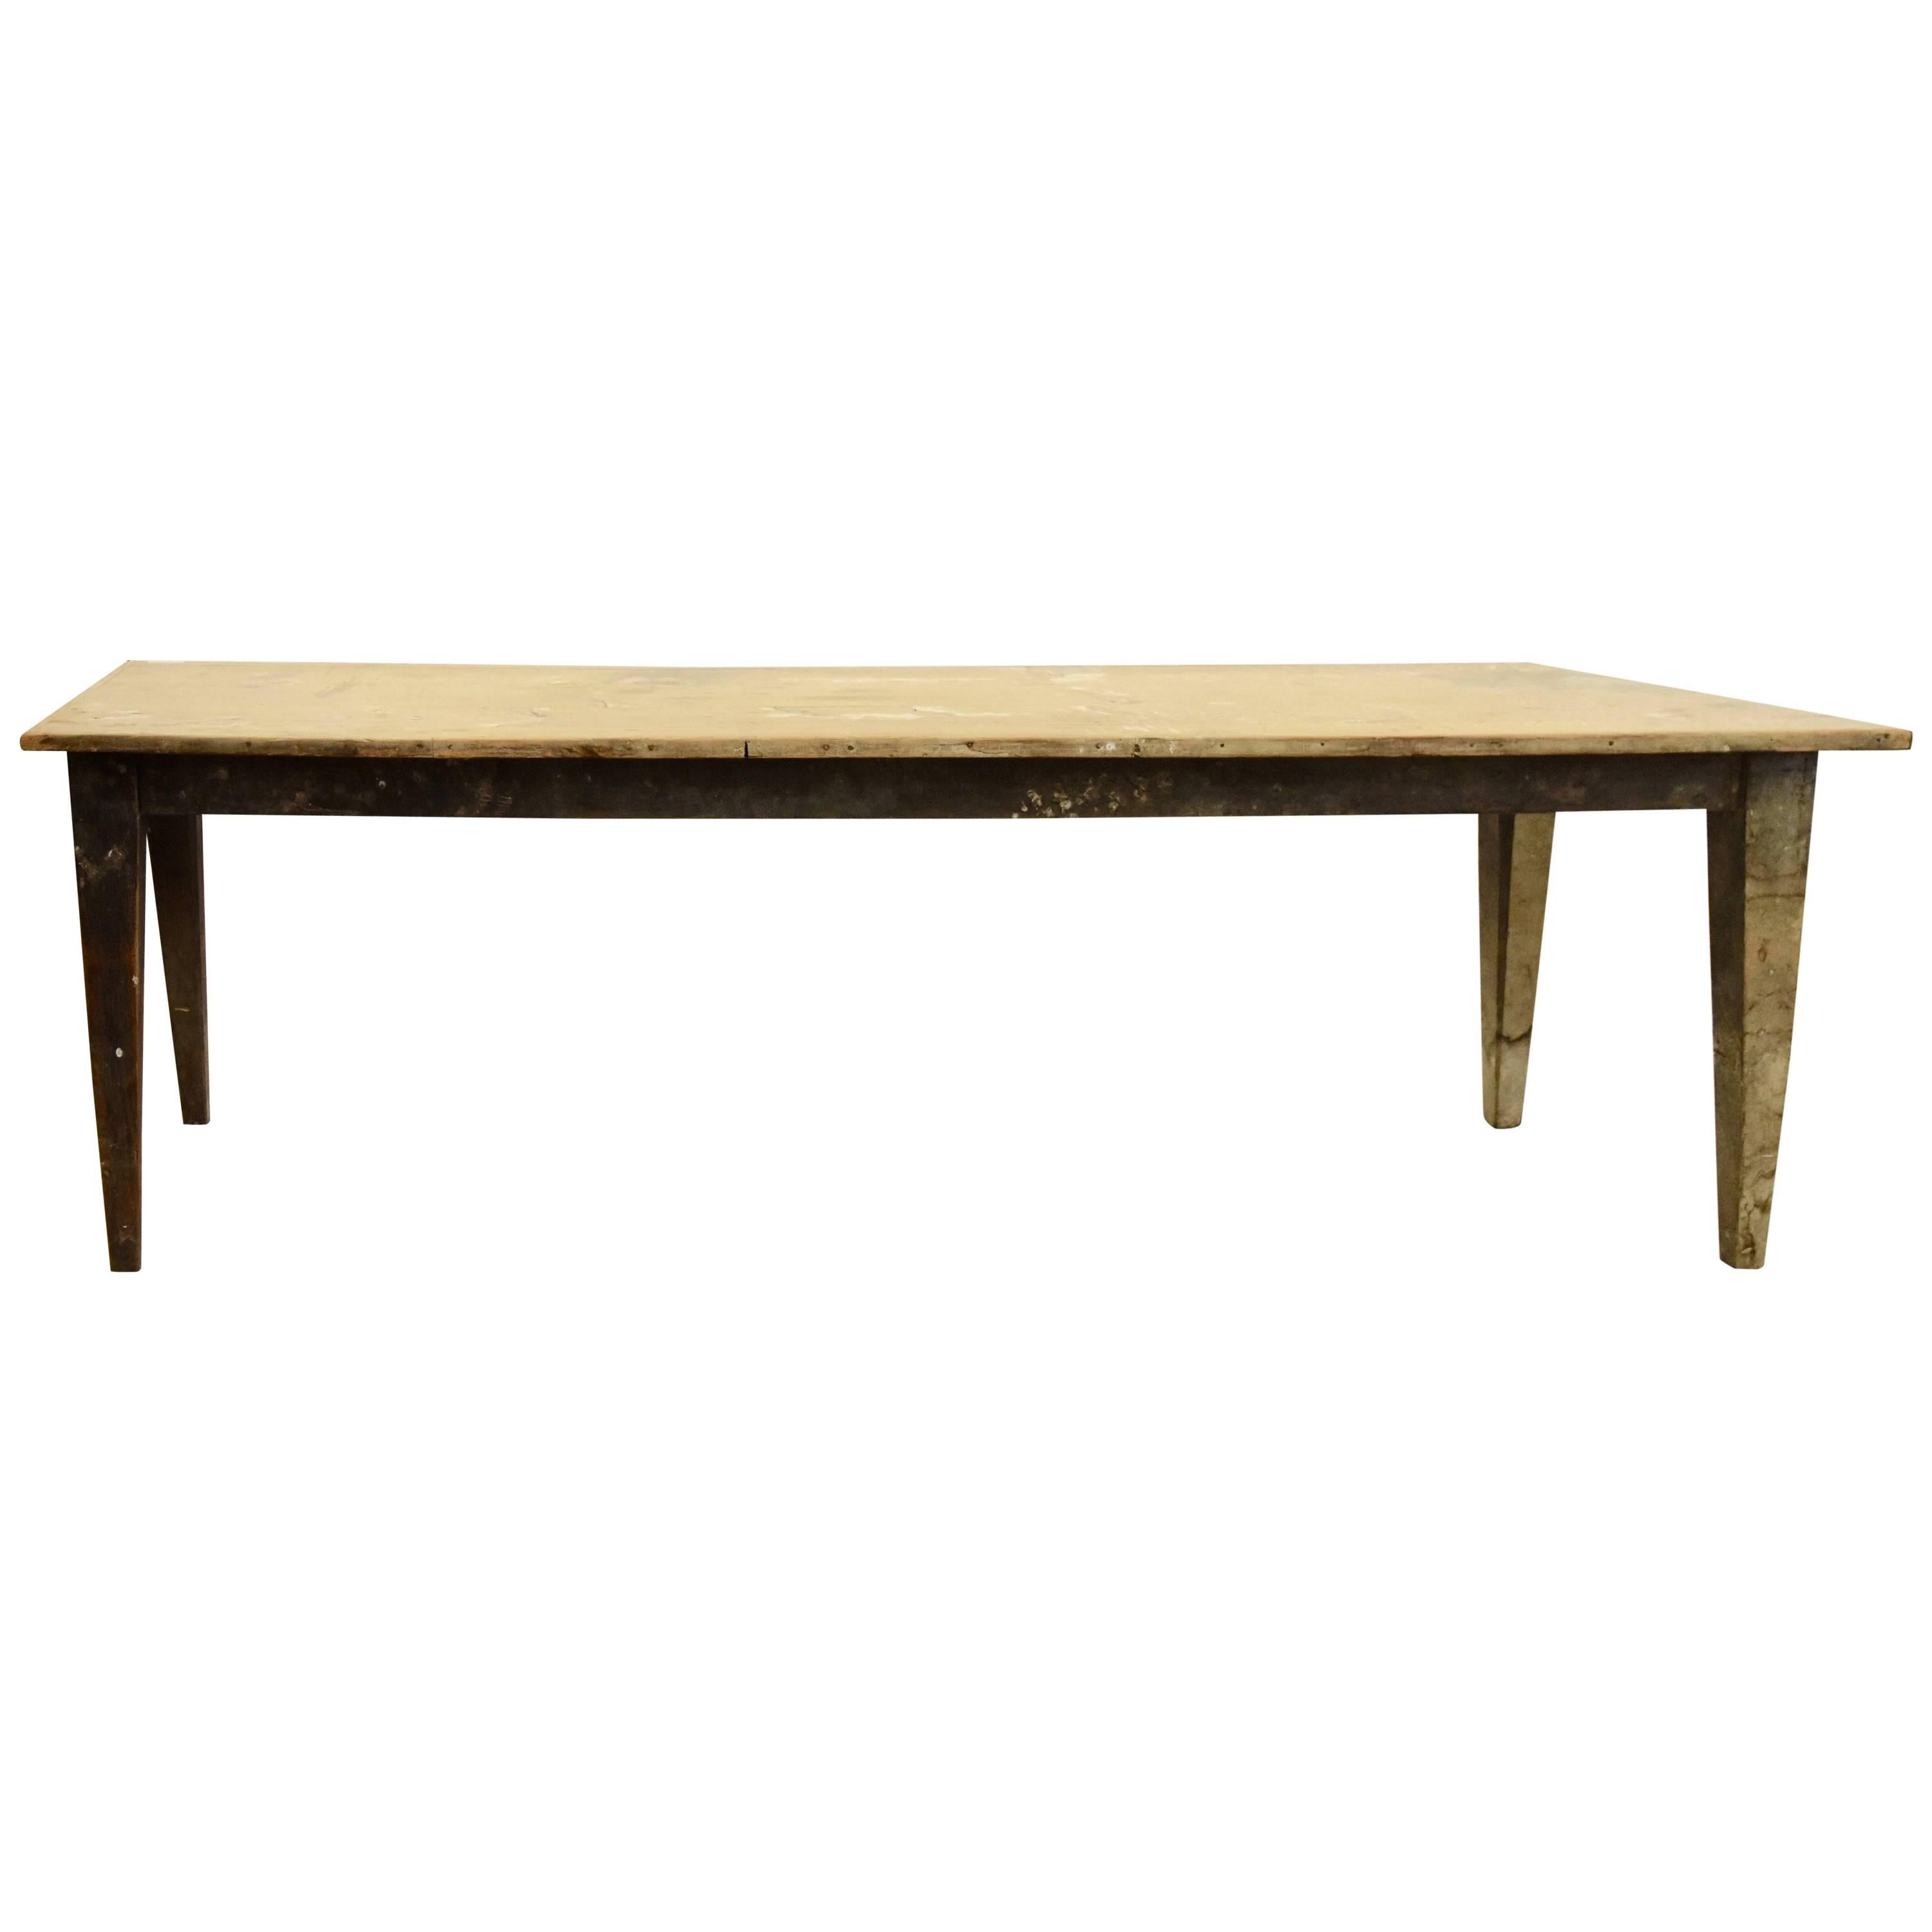 Late 19th Century Spanish Pine Rustic Dining or Work Table